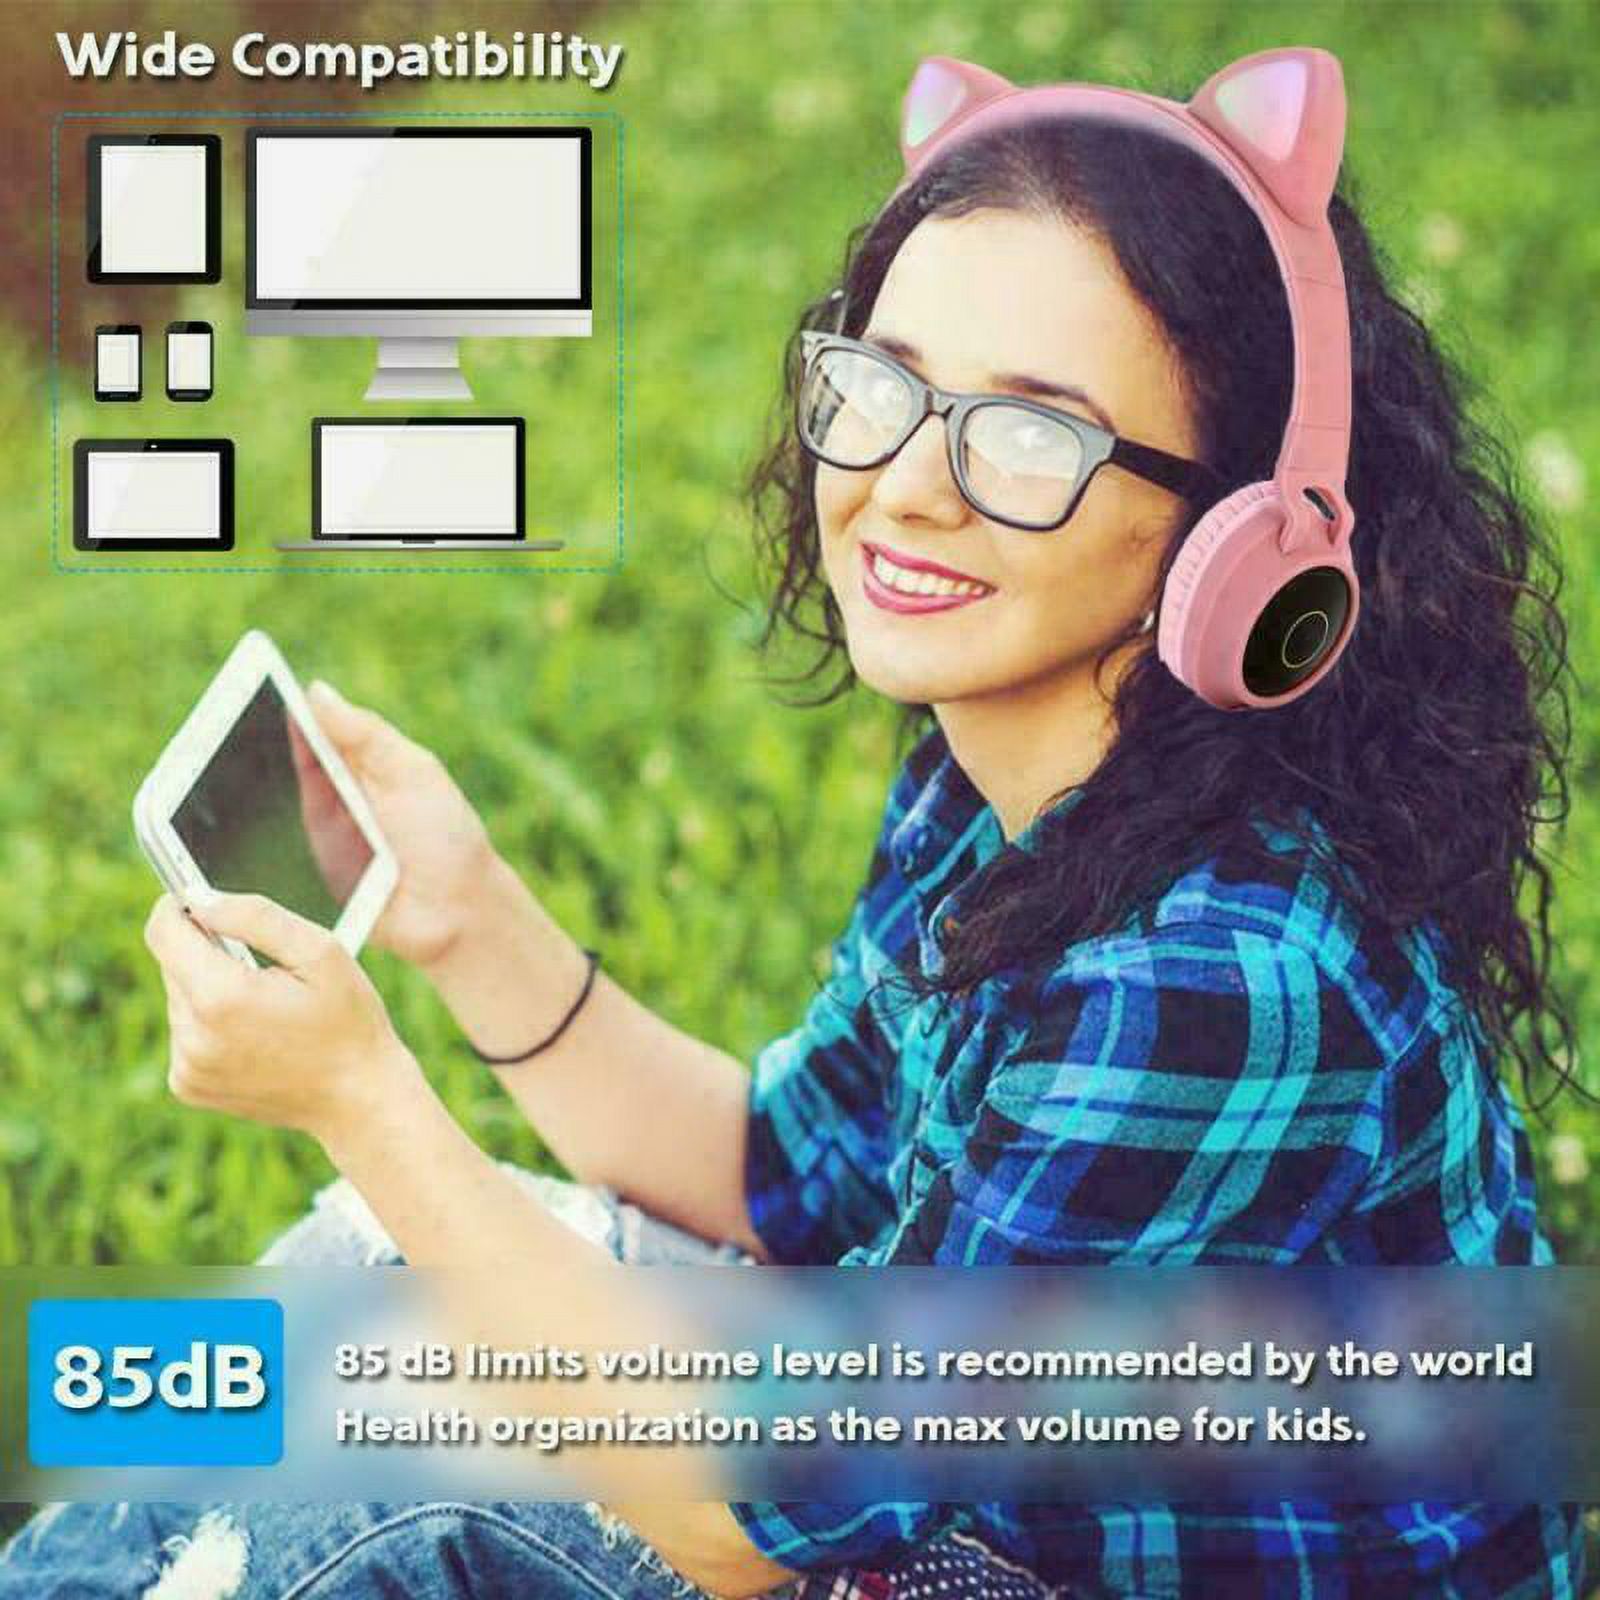 Kids Bluetooth 5.0 Cat Ear Headphones Foldable On-Ear Stereo Wireless Headset with Mic LED Light and Volume Control Support FM Radio/TF Card/Aux in Compatible with Smartphones PC Tablet-Pink - image 3 of 10